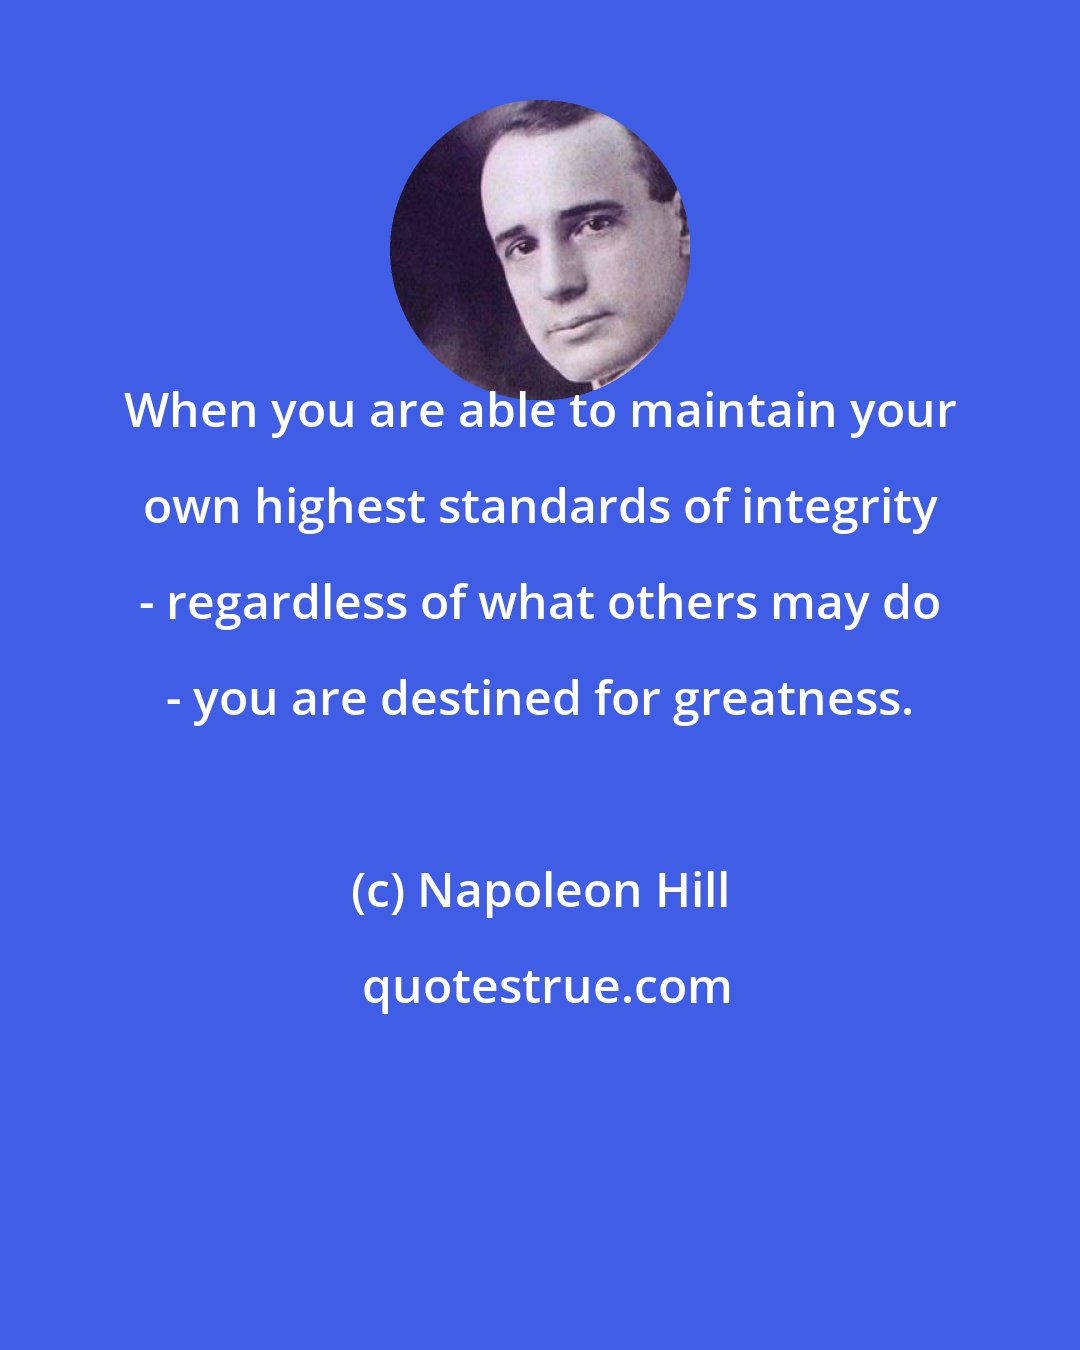 Napoleon Hill: When you are able to maintain your own highest standards of integrity - regardless of what others may do - you are destined for greatness.